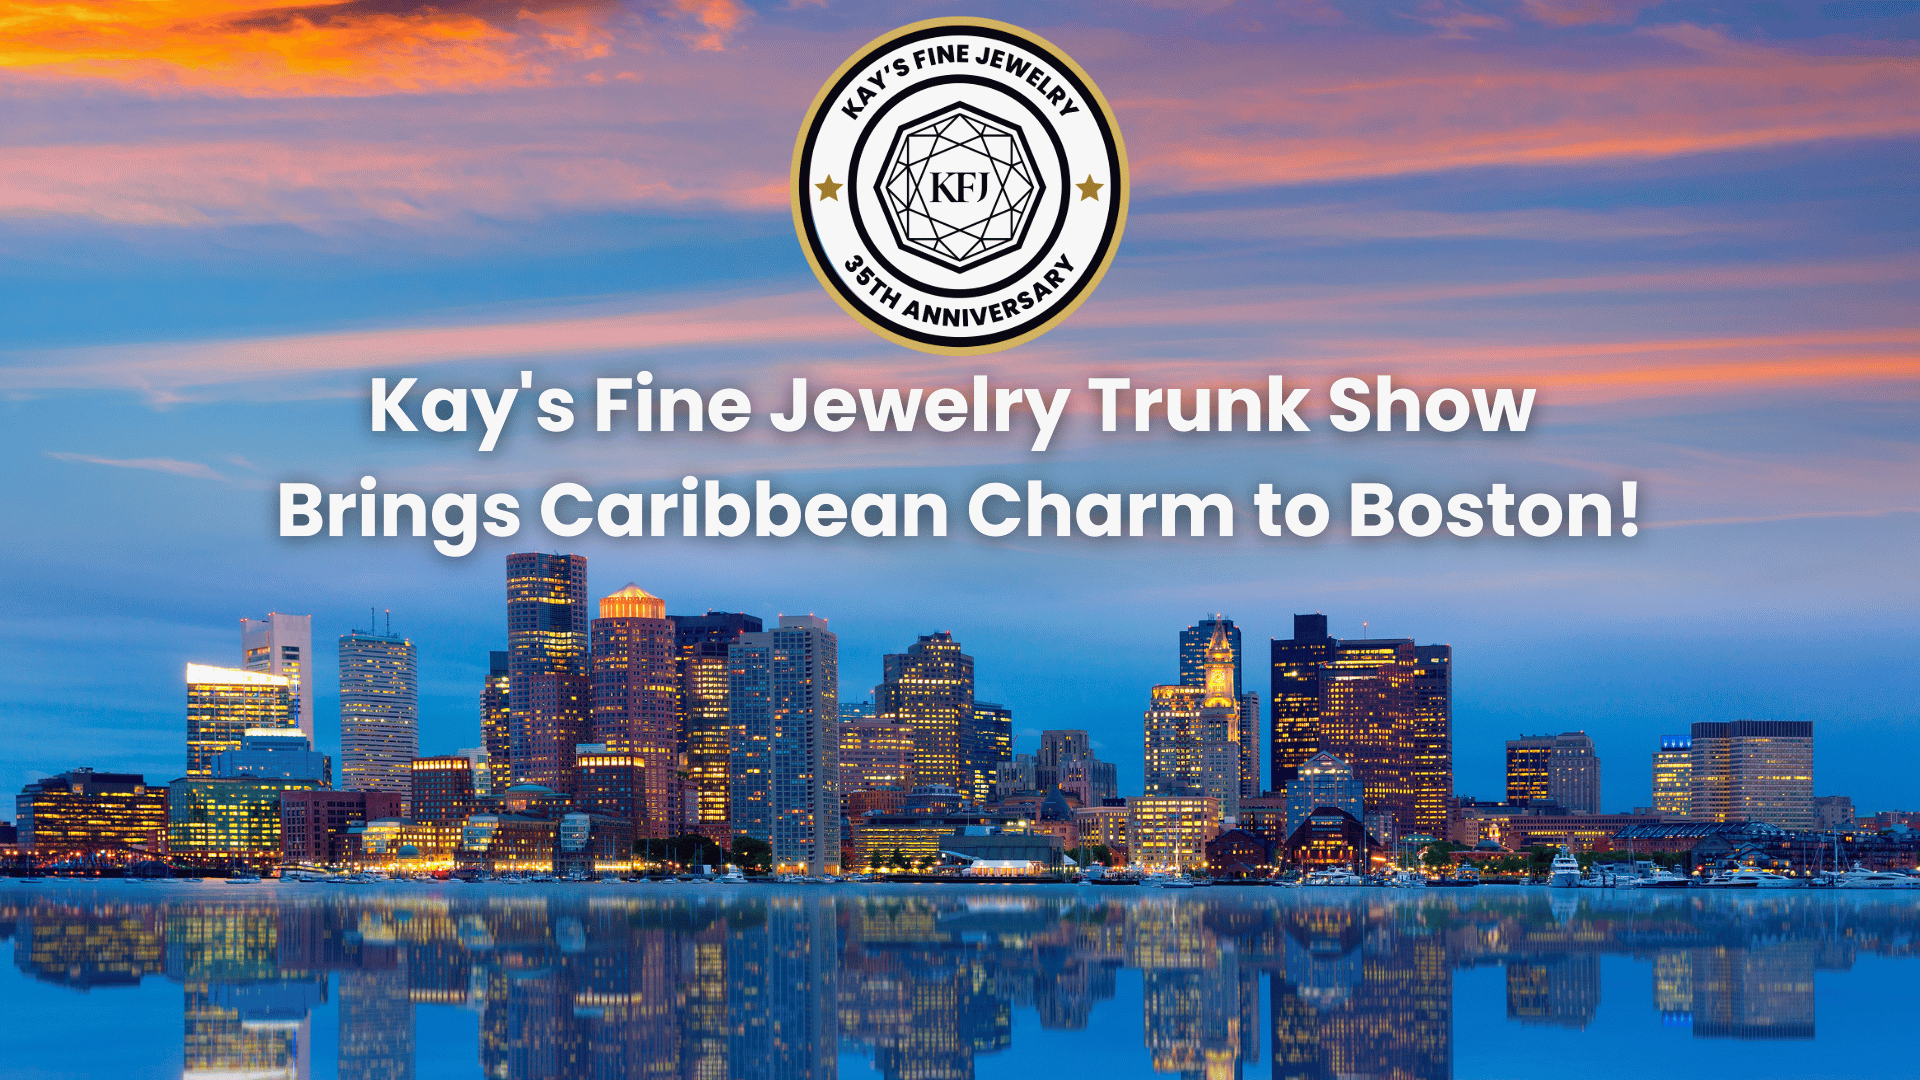 Kay's Fine Jewelry Trunk Show  Brings Caribbean Charm to Boston!